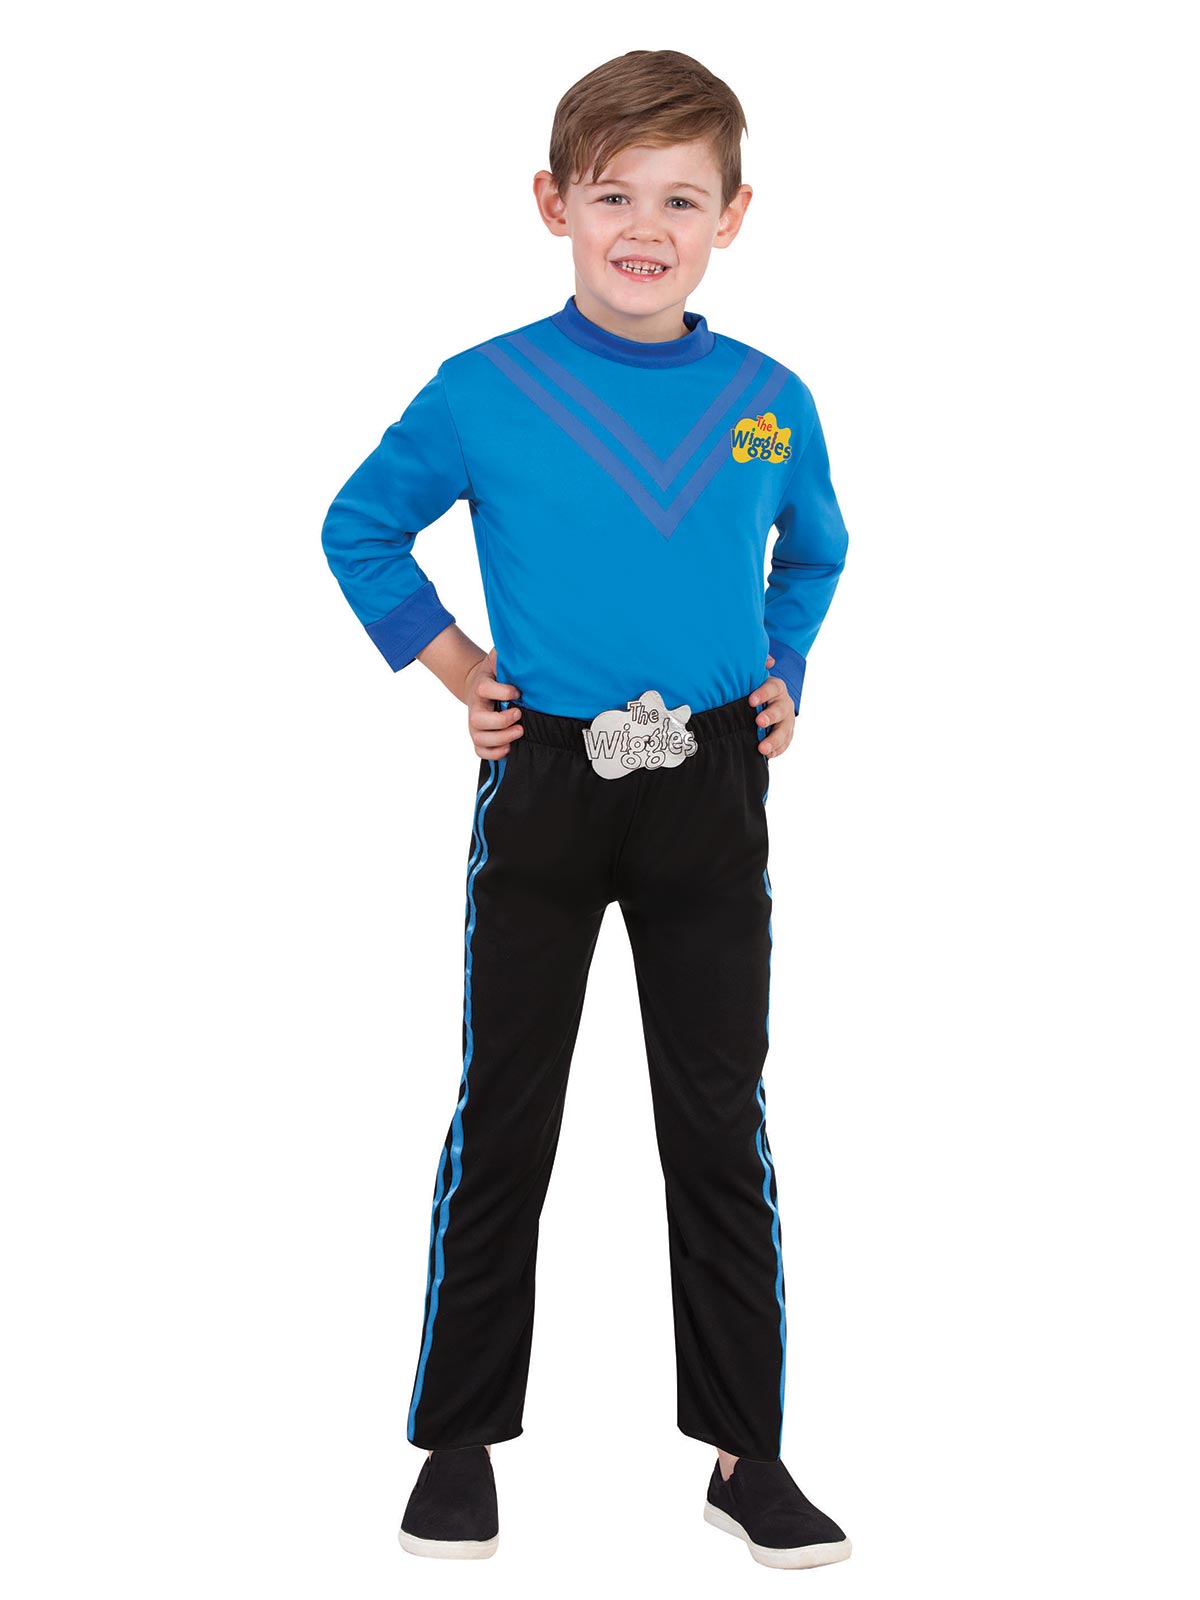 ANTHONY WIGGLE DELUXE CHILD COSTUME